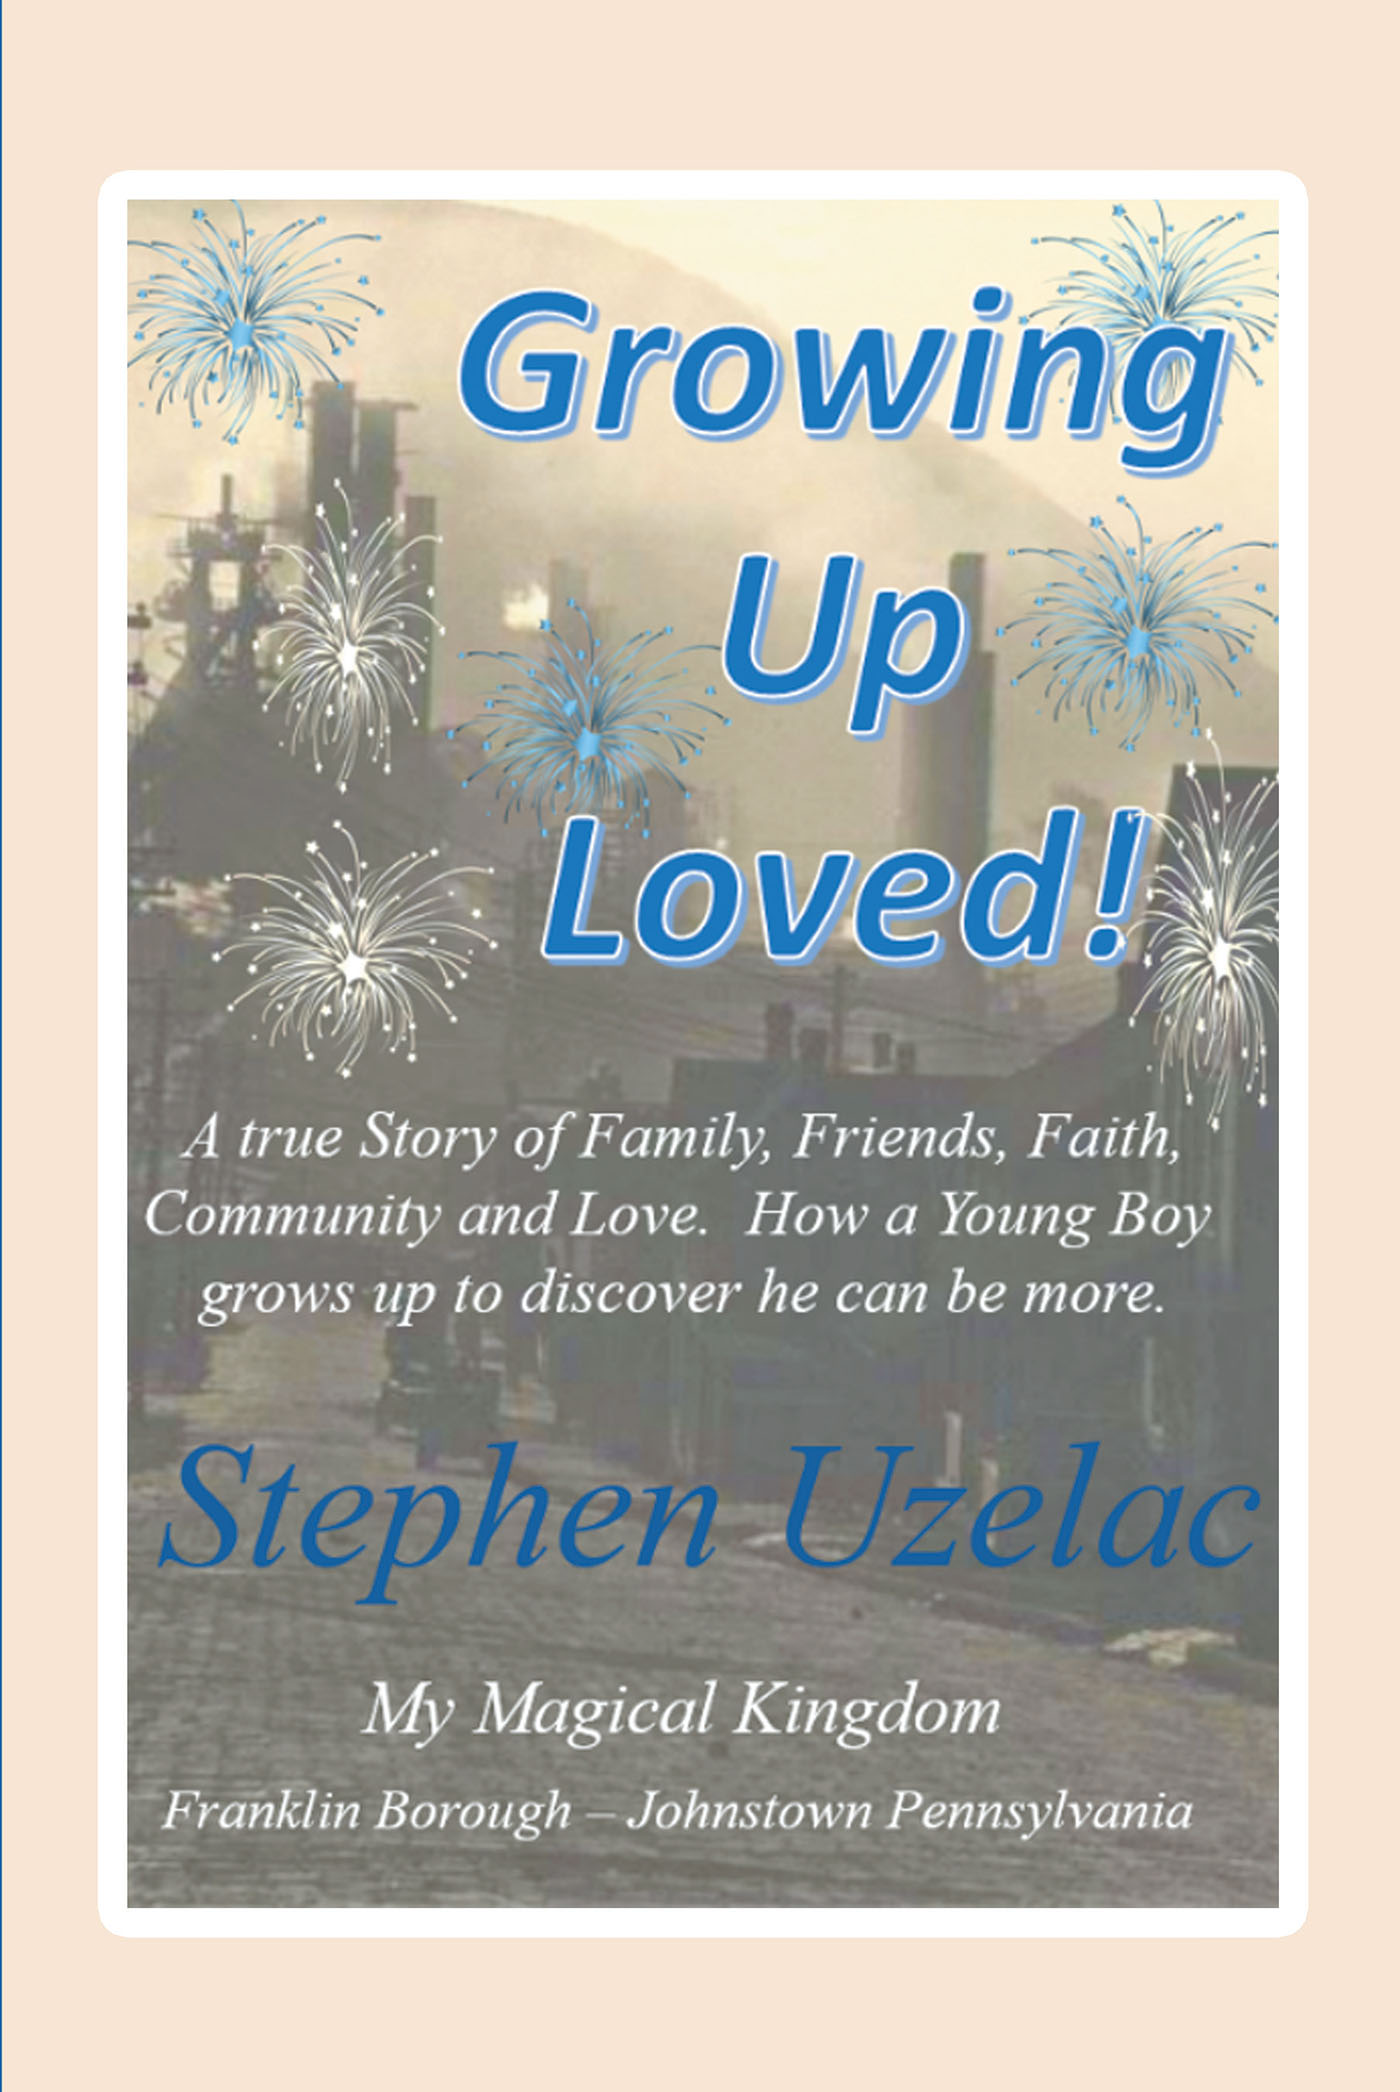 Stephen Uzelac’s Newly Released "Growing Up Loved!" is a Touching Memoir That Examines the Need for Community and Human Connection